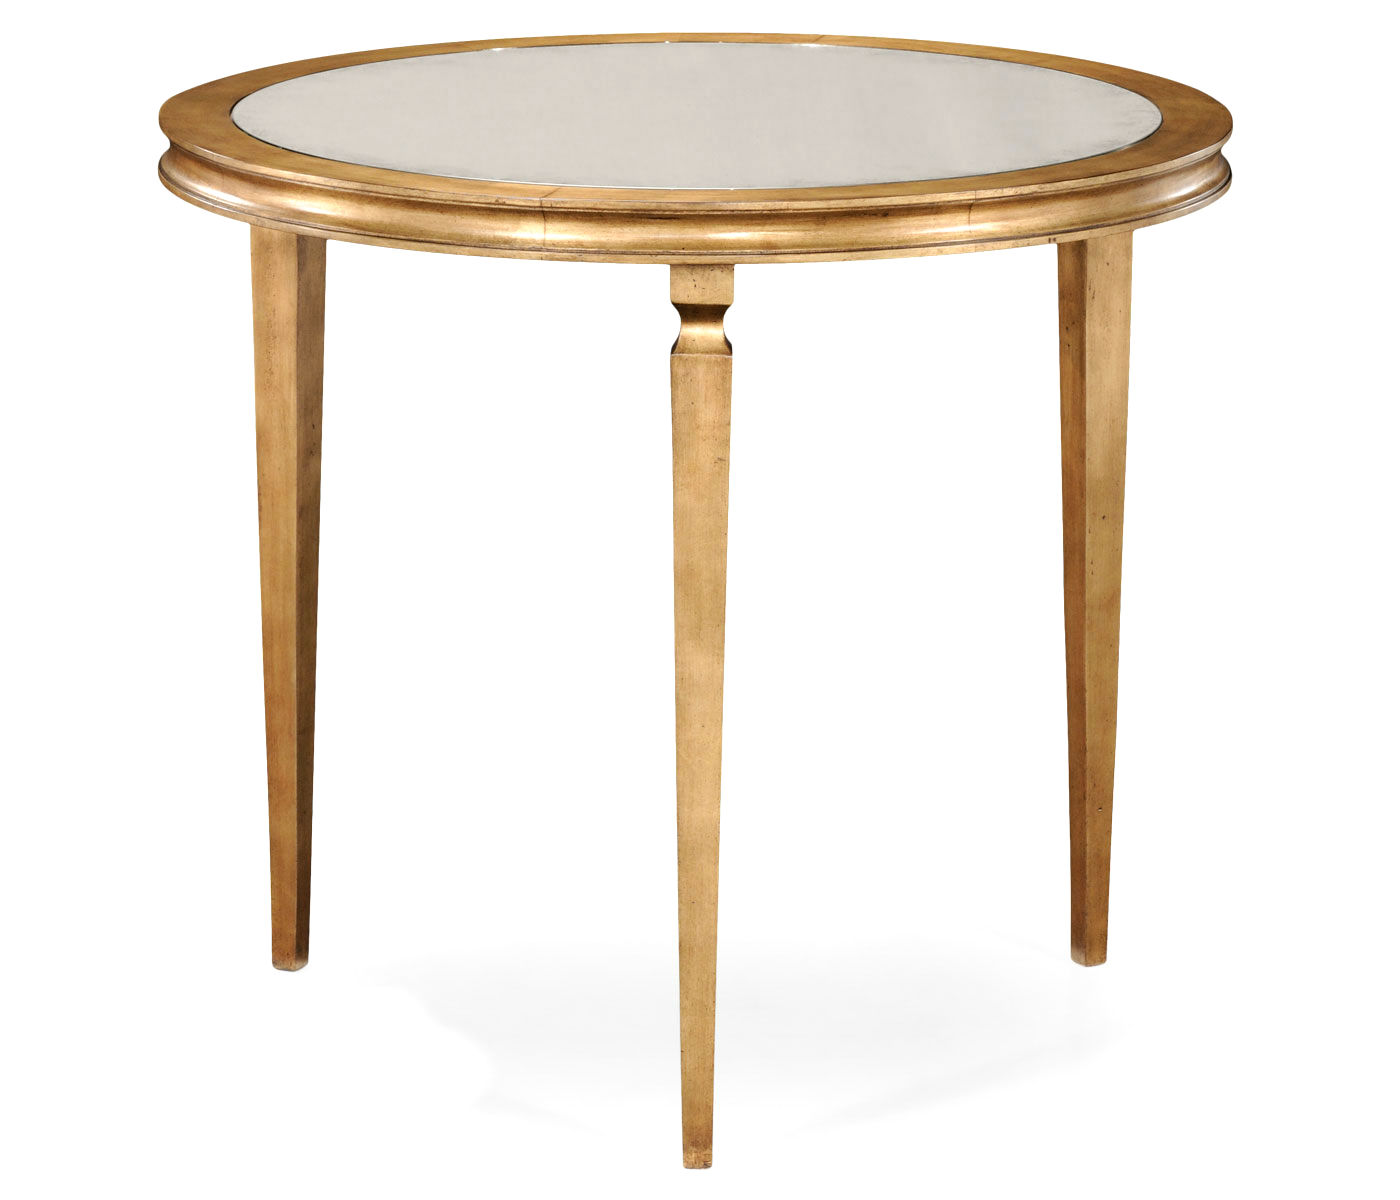 italian tables style gold side accent table lighting seattle classic tall antique mirrored antiqued gilded partner end console coffee available hospitality and glass matching